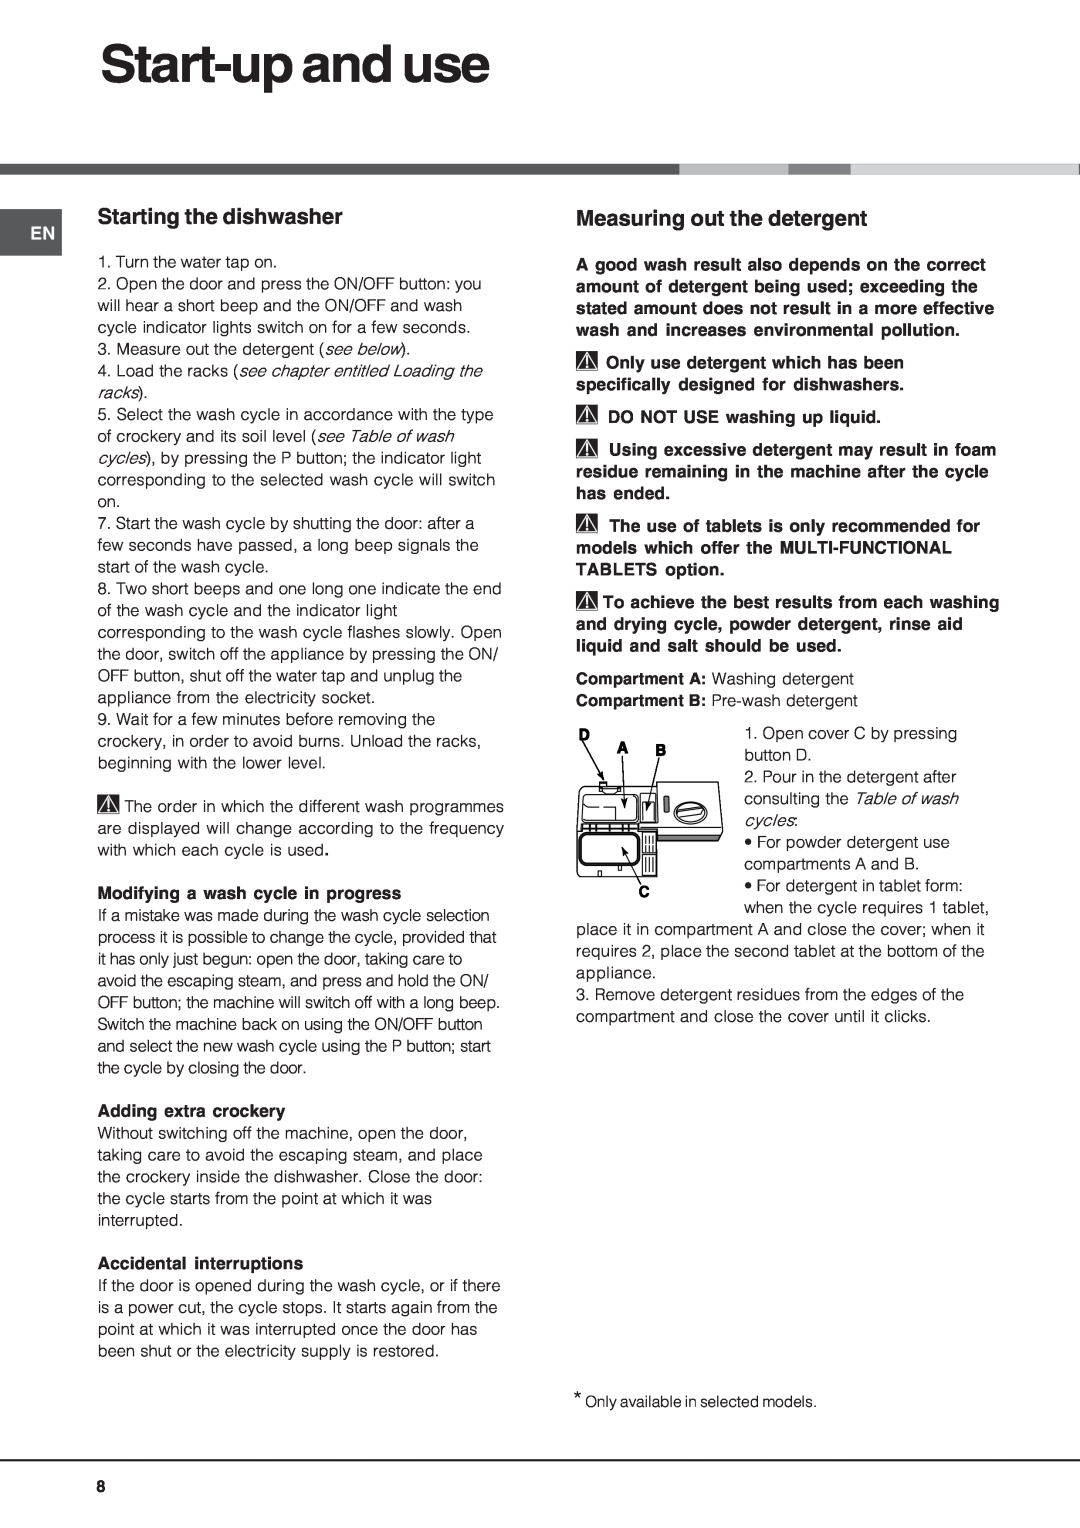 Hotpoint LFT04 manual Start-upand use, Starting the dishwasher, Measuring out the detergent 